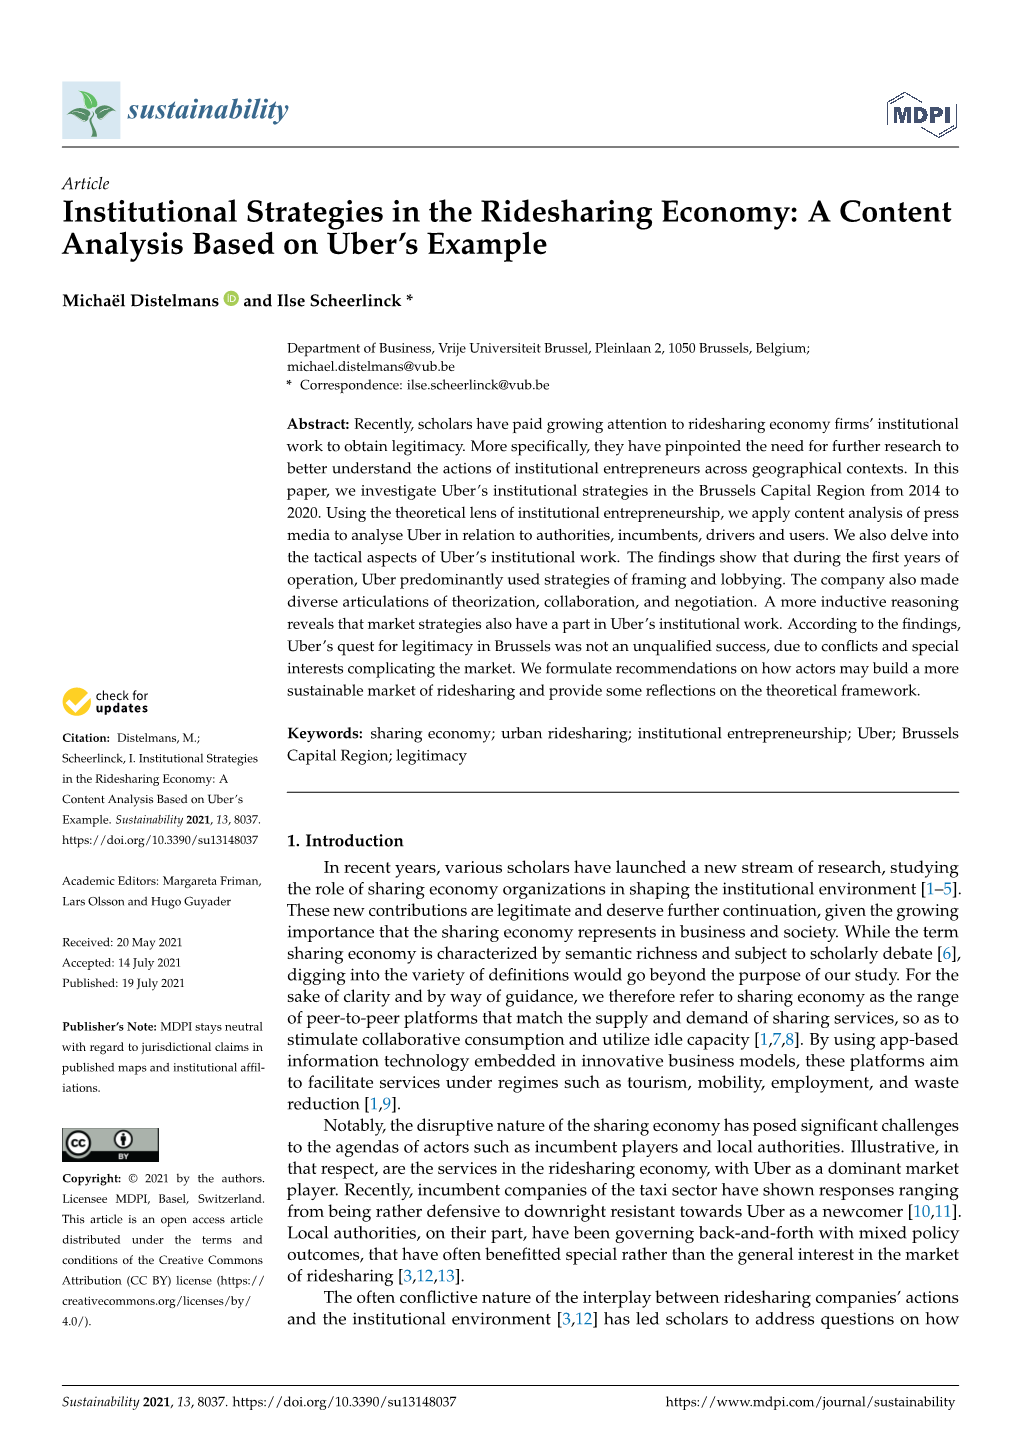 Institutional Strategies in the Ridesharing Economy: a Content Analysis Based on Uber’S Example